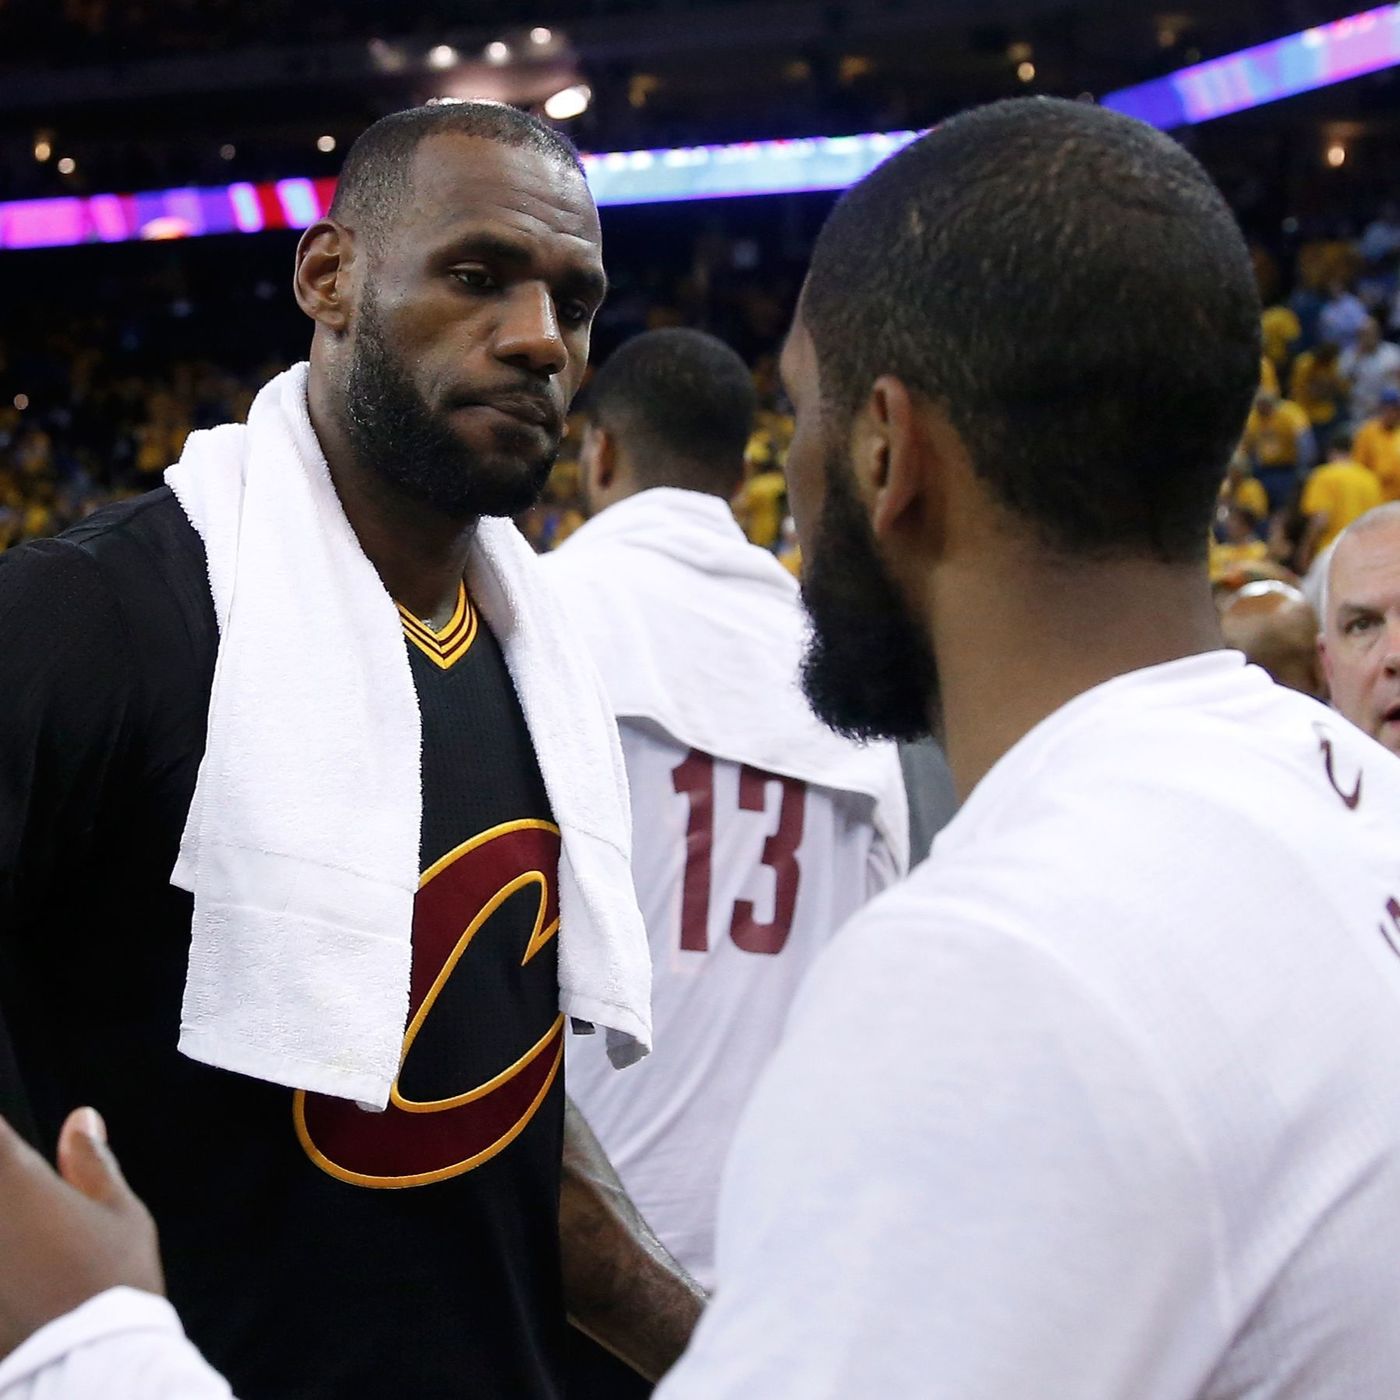 Kyrie Irving, LeBron James were amazing as Cavs force Game 6